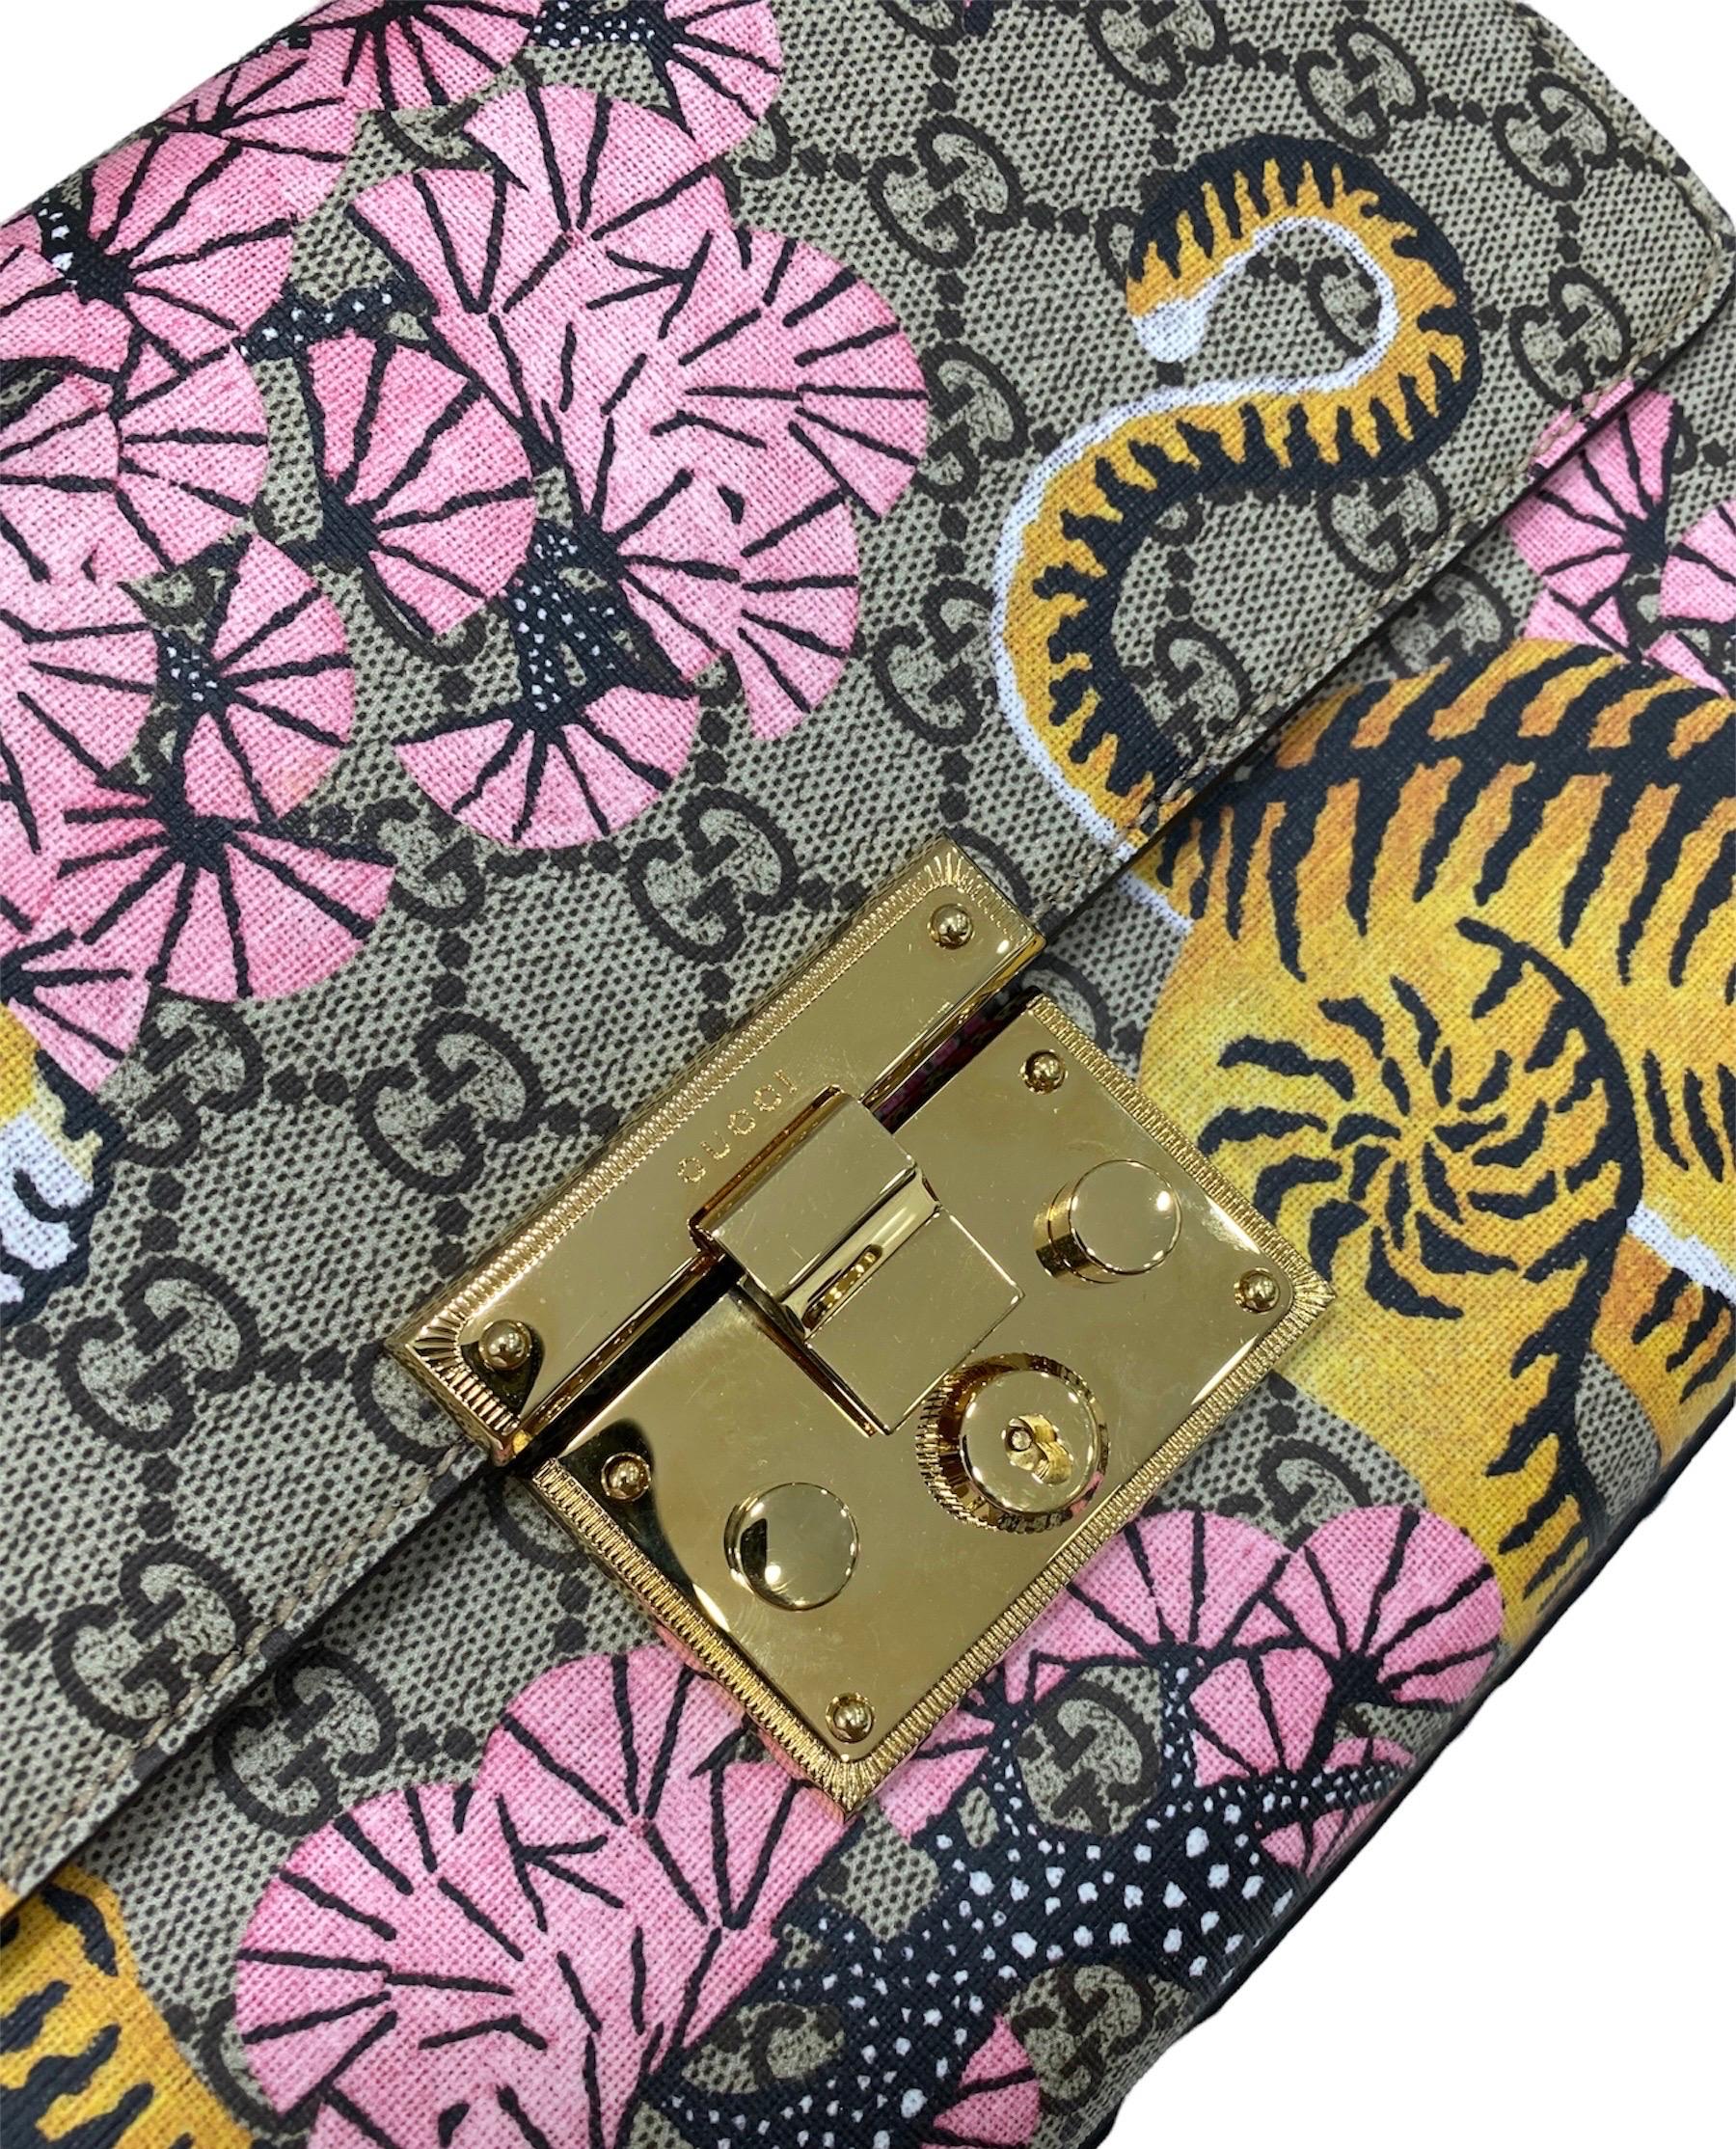 Gucci bag, Padlock model, made of GG Supreme canvas with floral and tiger pattern.

Equipped with a flap with interlocking closure, internally lined in very large beige suede.

Equipped with a sliding chain shoulder strap, to wear the bag over the